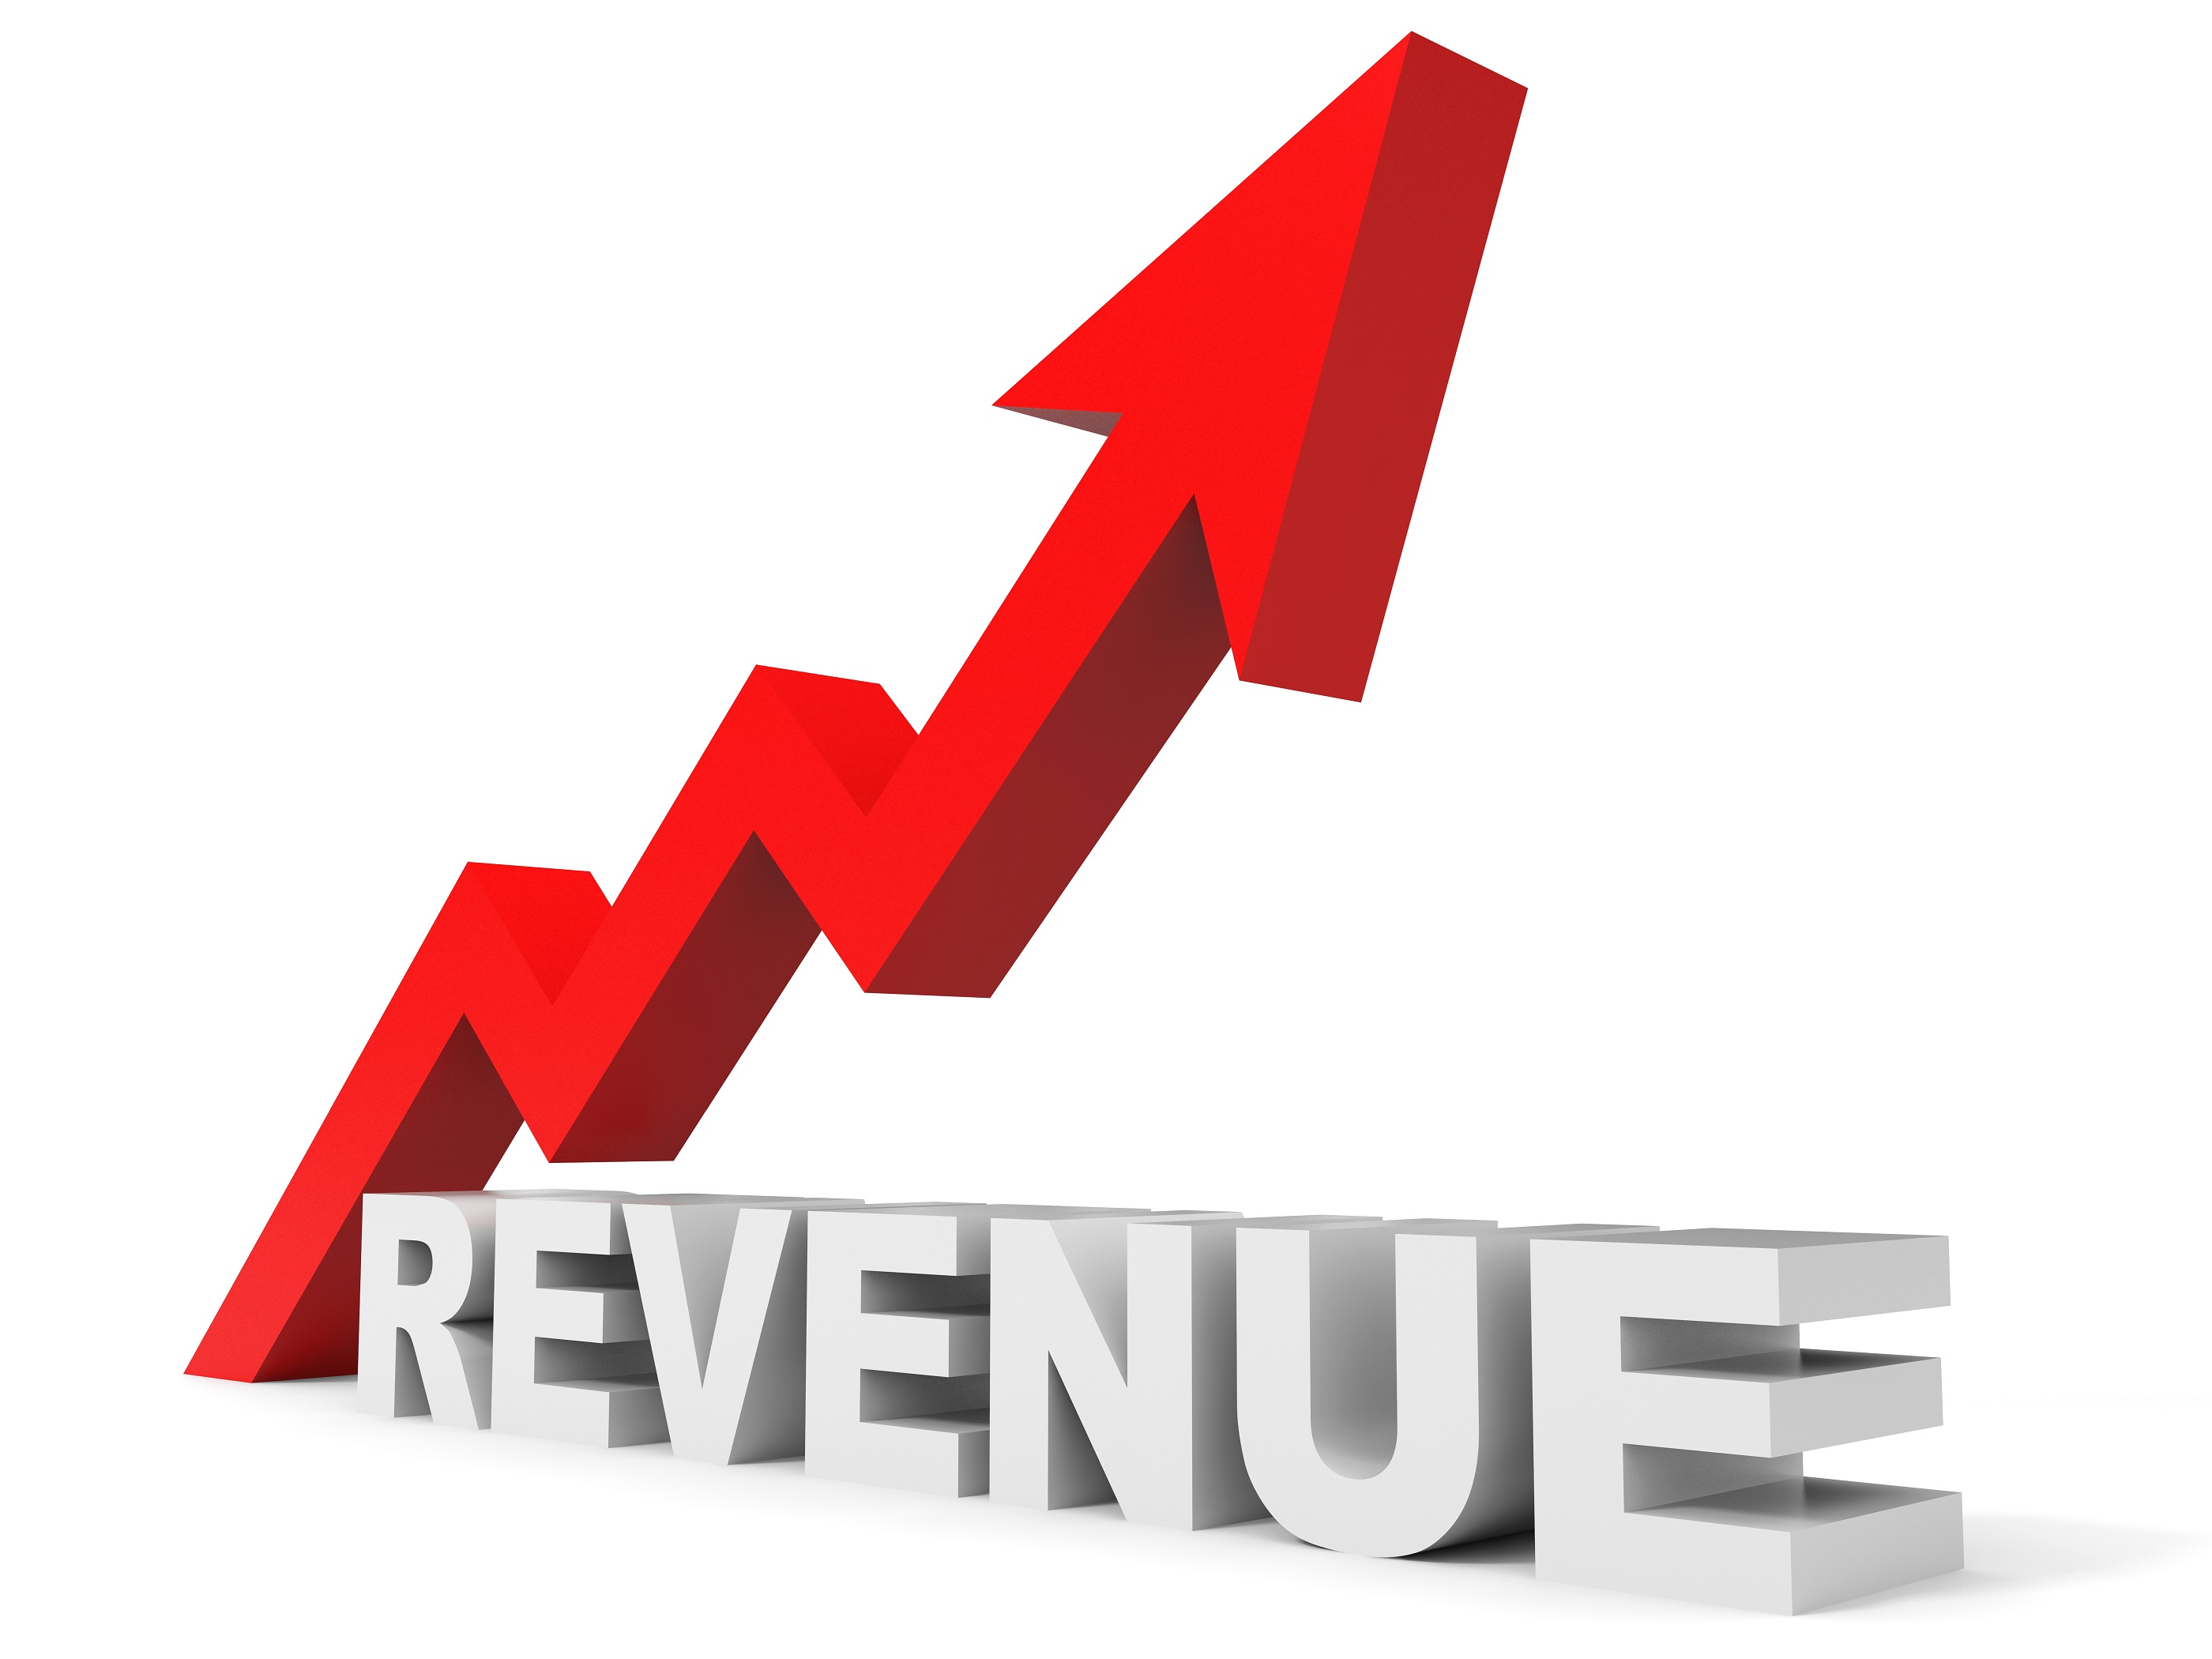 Ancillary Revenue for Airline Industry